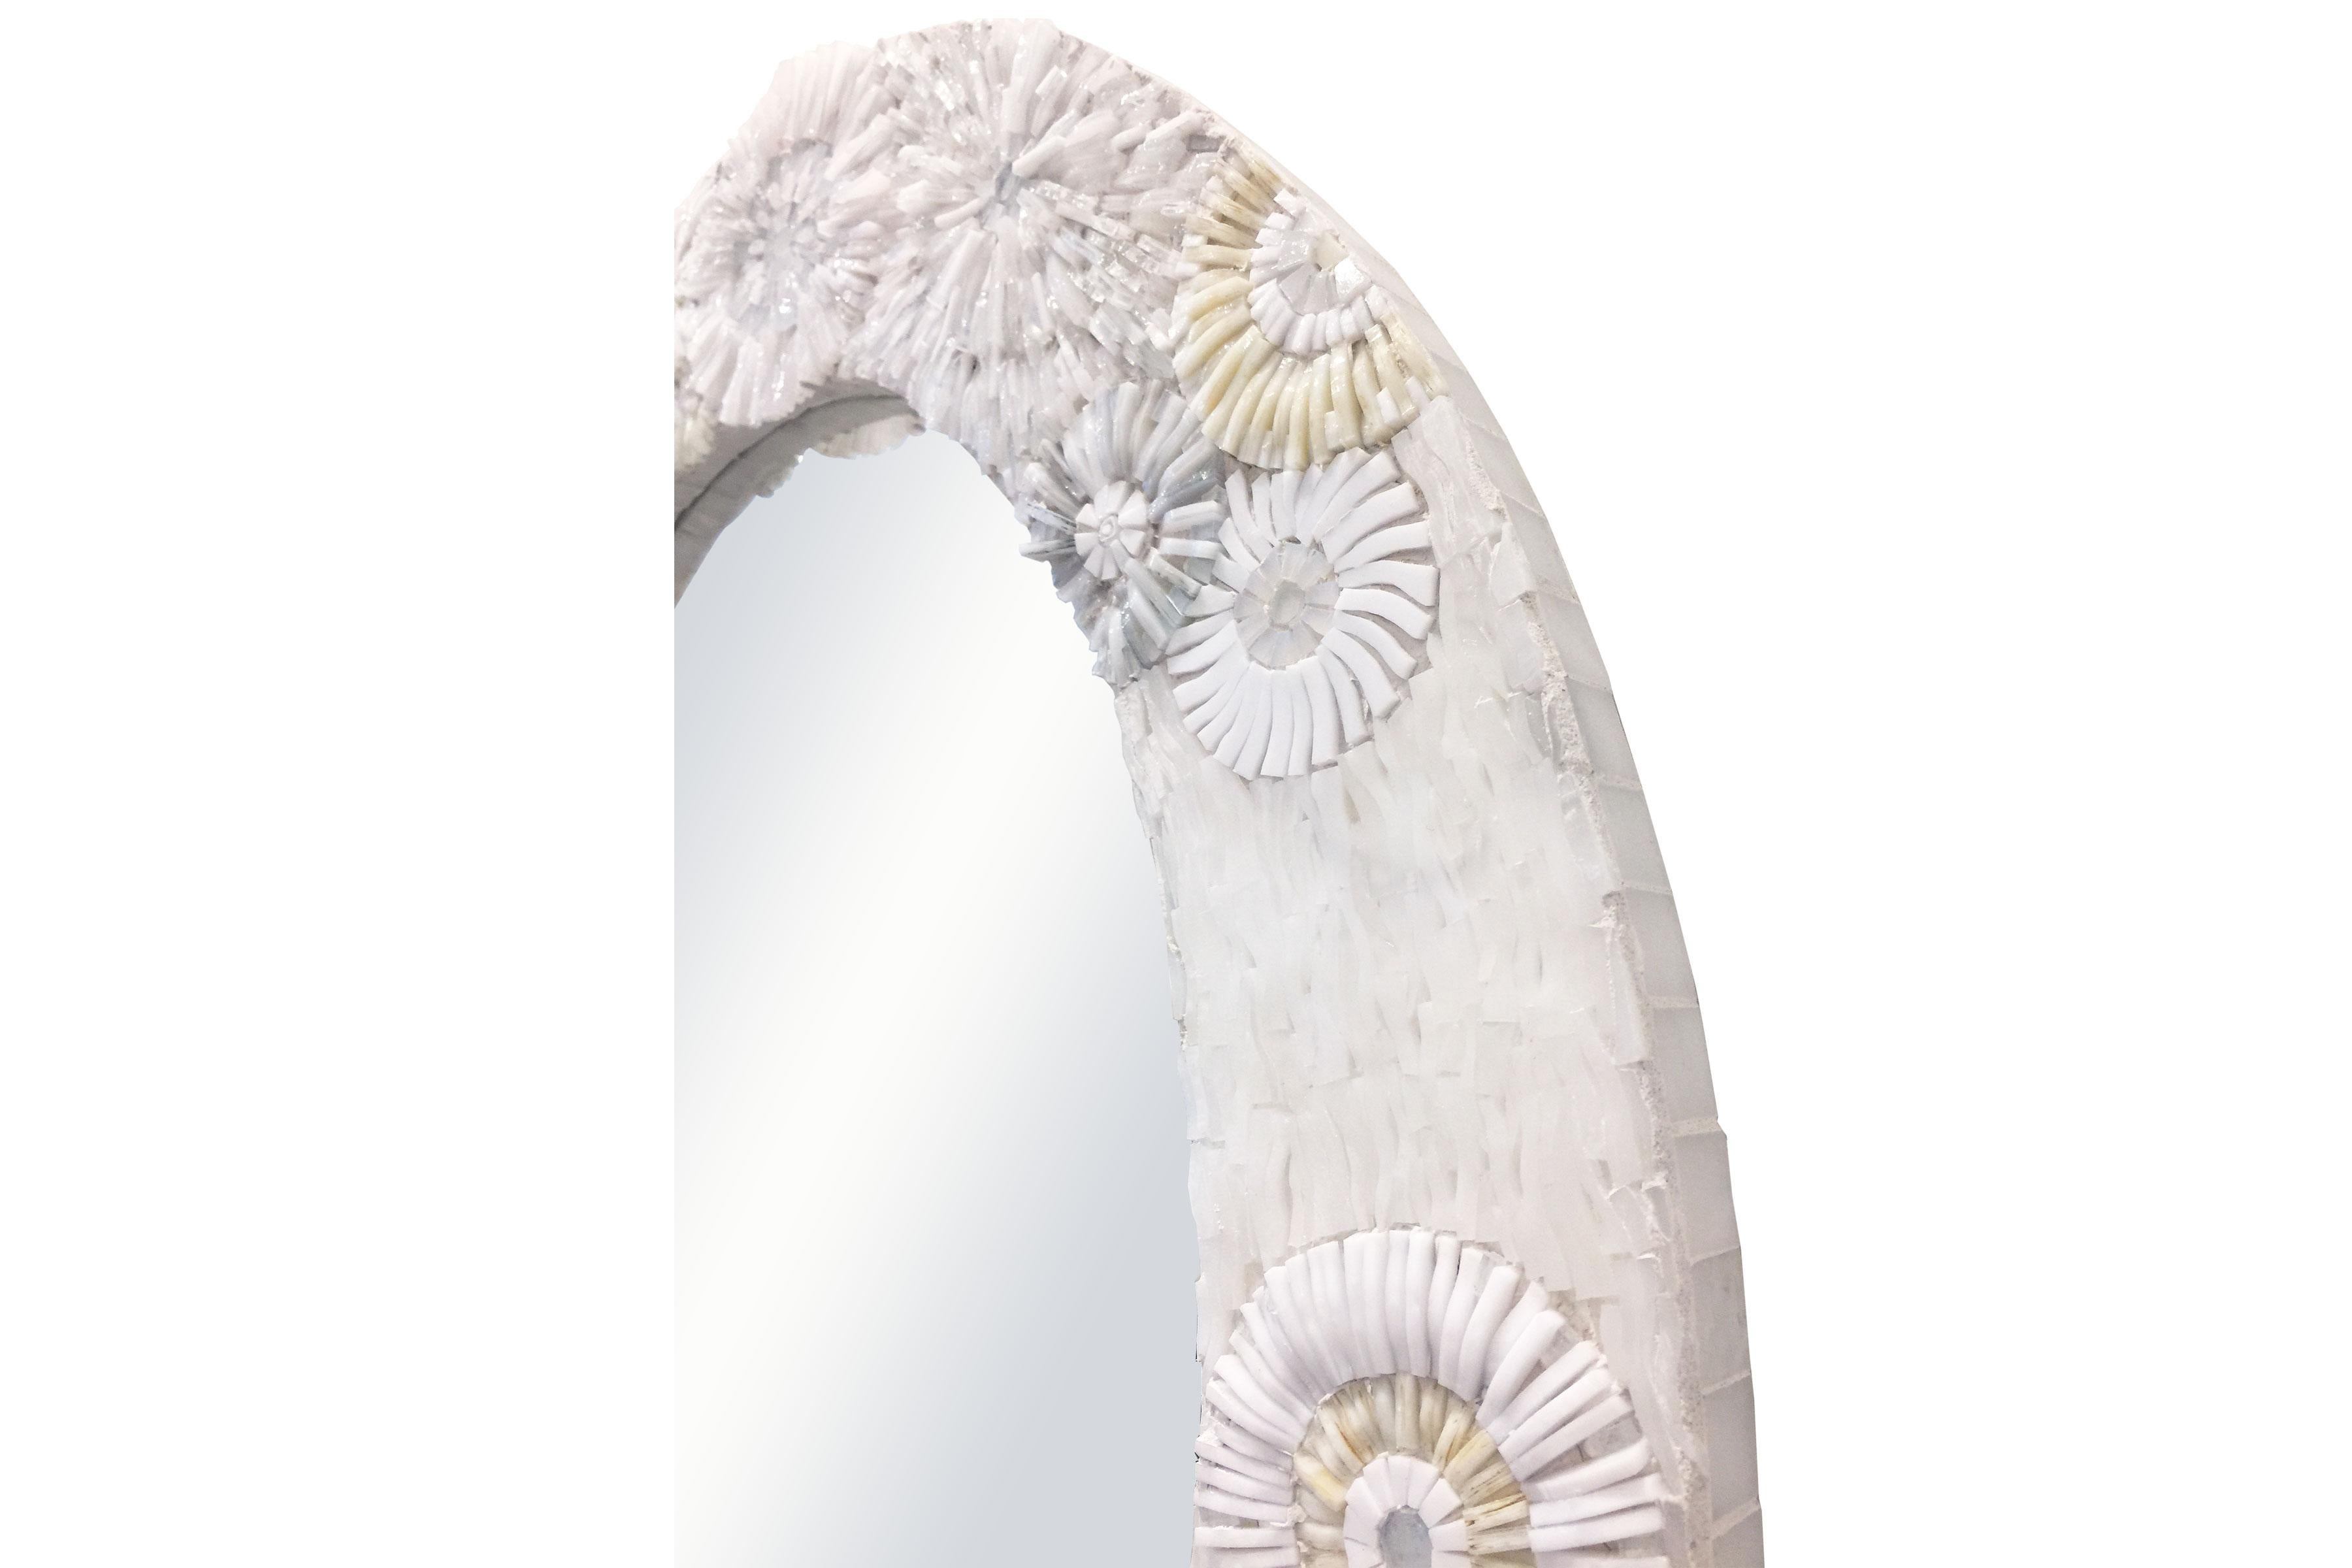 The Blossom oval mirror by Ercole Home has 4